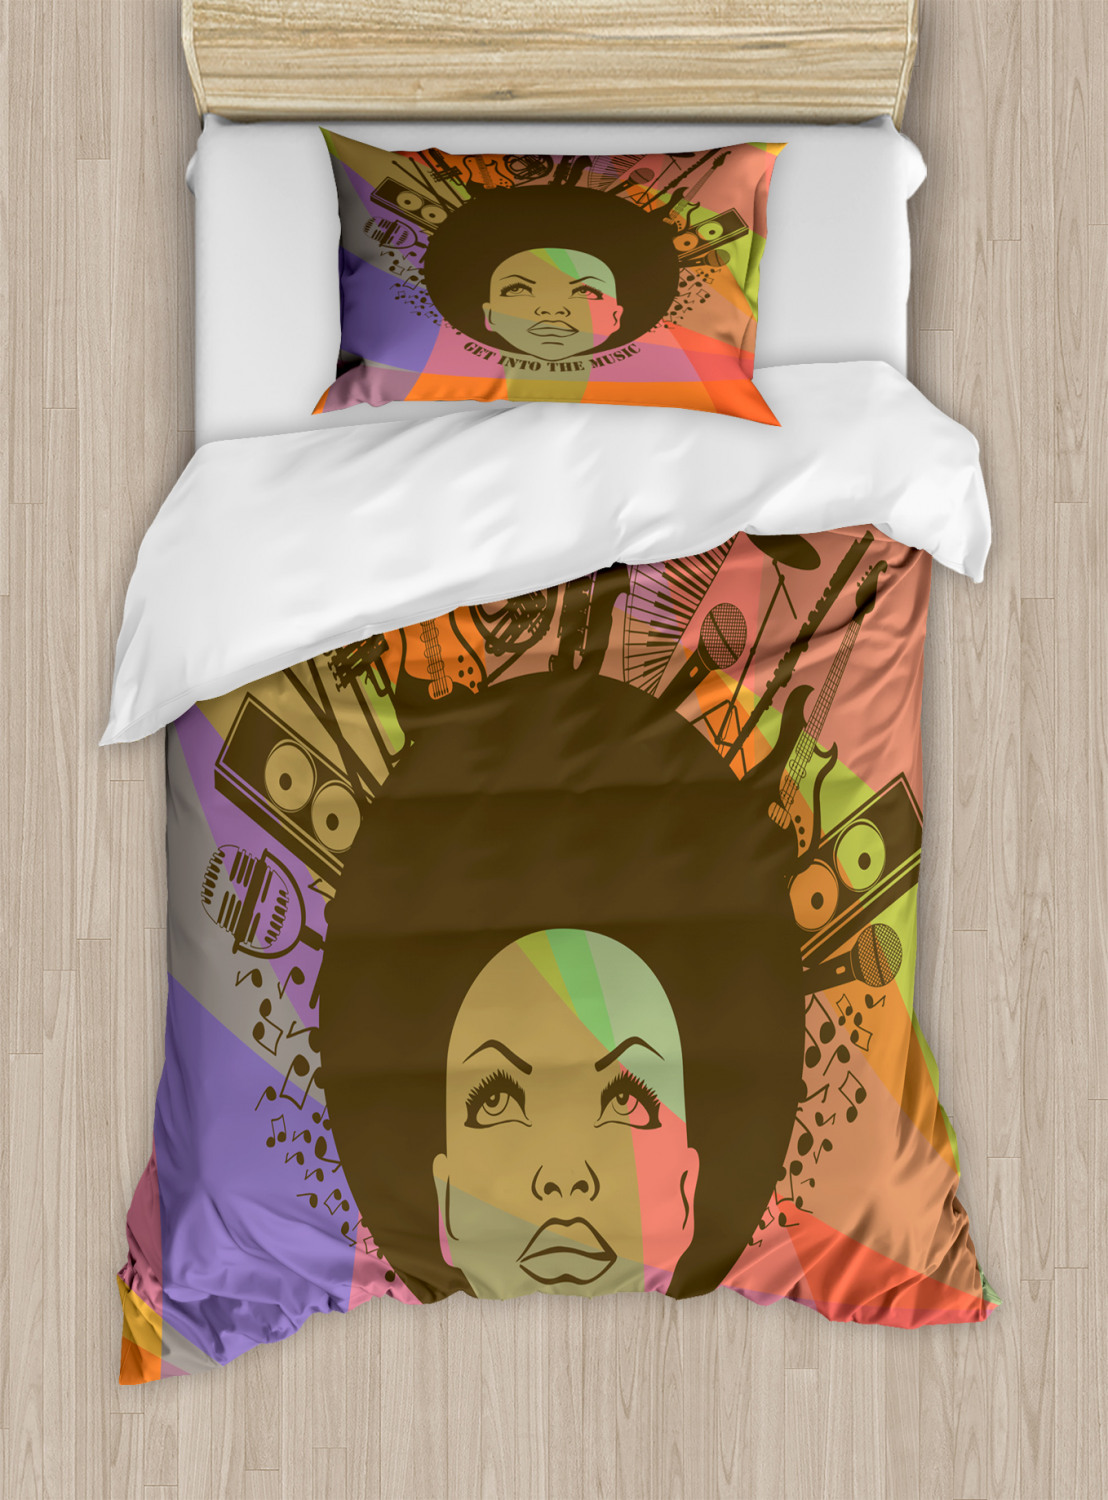 Music Duvet Cover Set with Pillow Shams African American Woman Print 